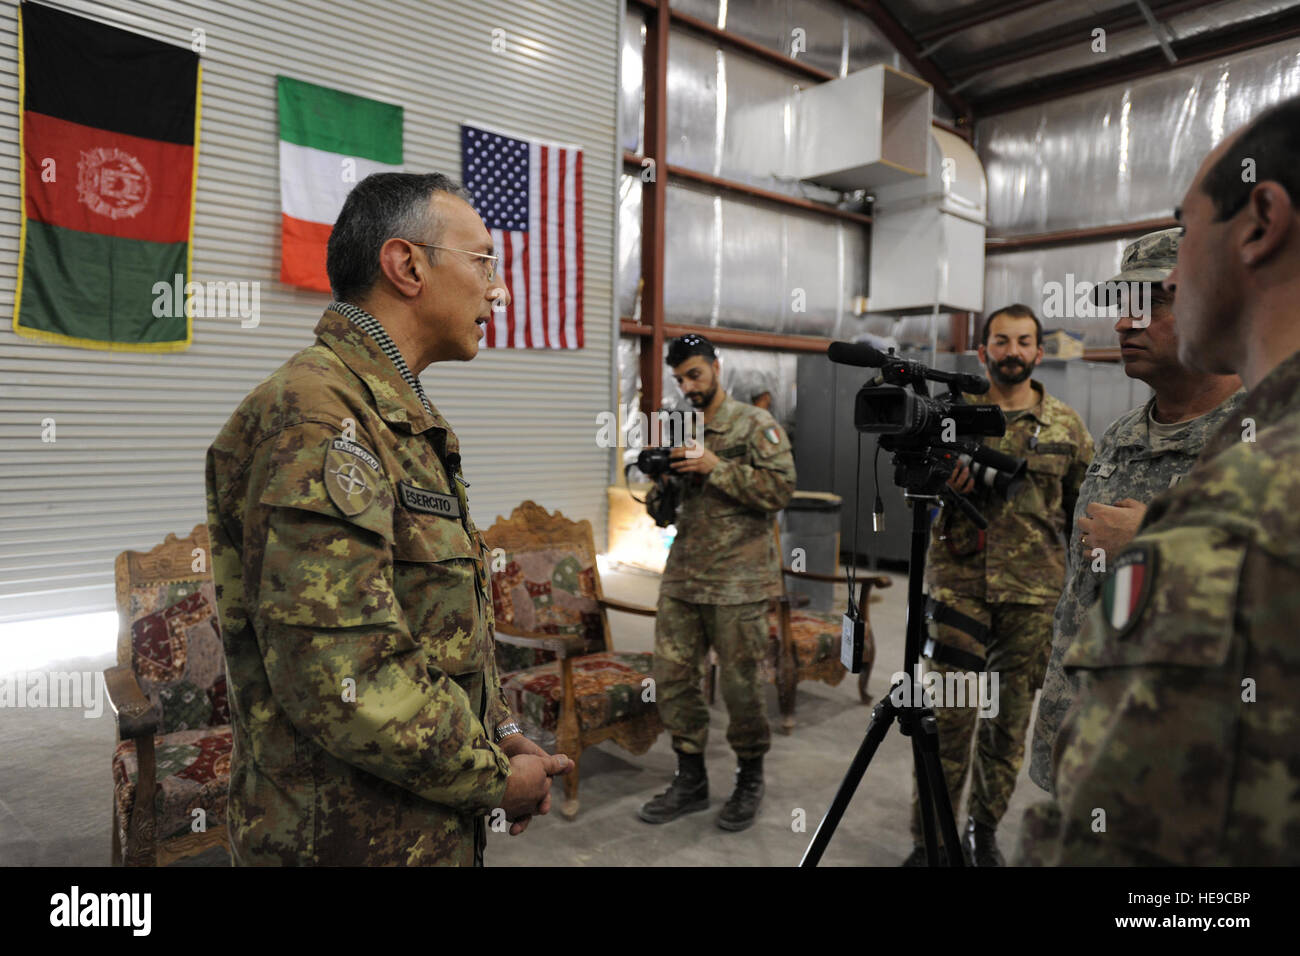 The Regional Command West (RC-West) Commander, Italian Brig. Gen. Alessandro Veltri, is interviewed by the Armed Forces Network (AFN) following the Change of Command Ceremony for the Farah Provincial Reconstruction Team (PRT), March 13, 2010, Forward Operating Base (FOB) Farah, Afghanistan. There are a total of four PRTs under Gen. Veltri’s command and the Farah PRT is the only American ran PRT in the Italian battle space. Stock Photo